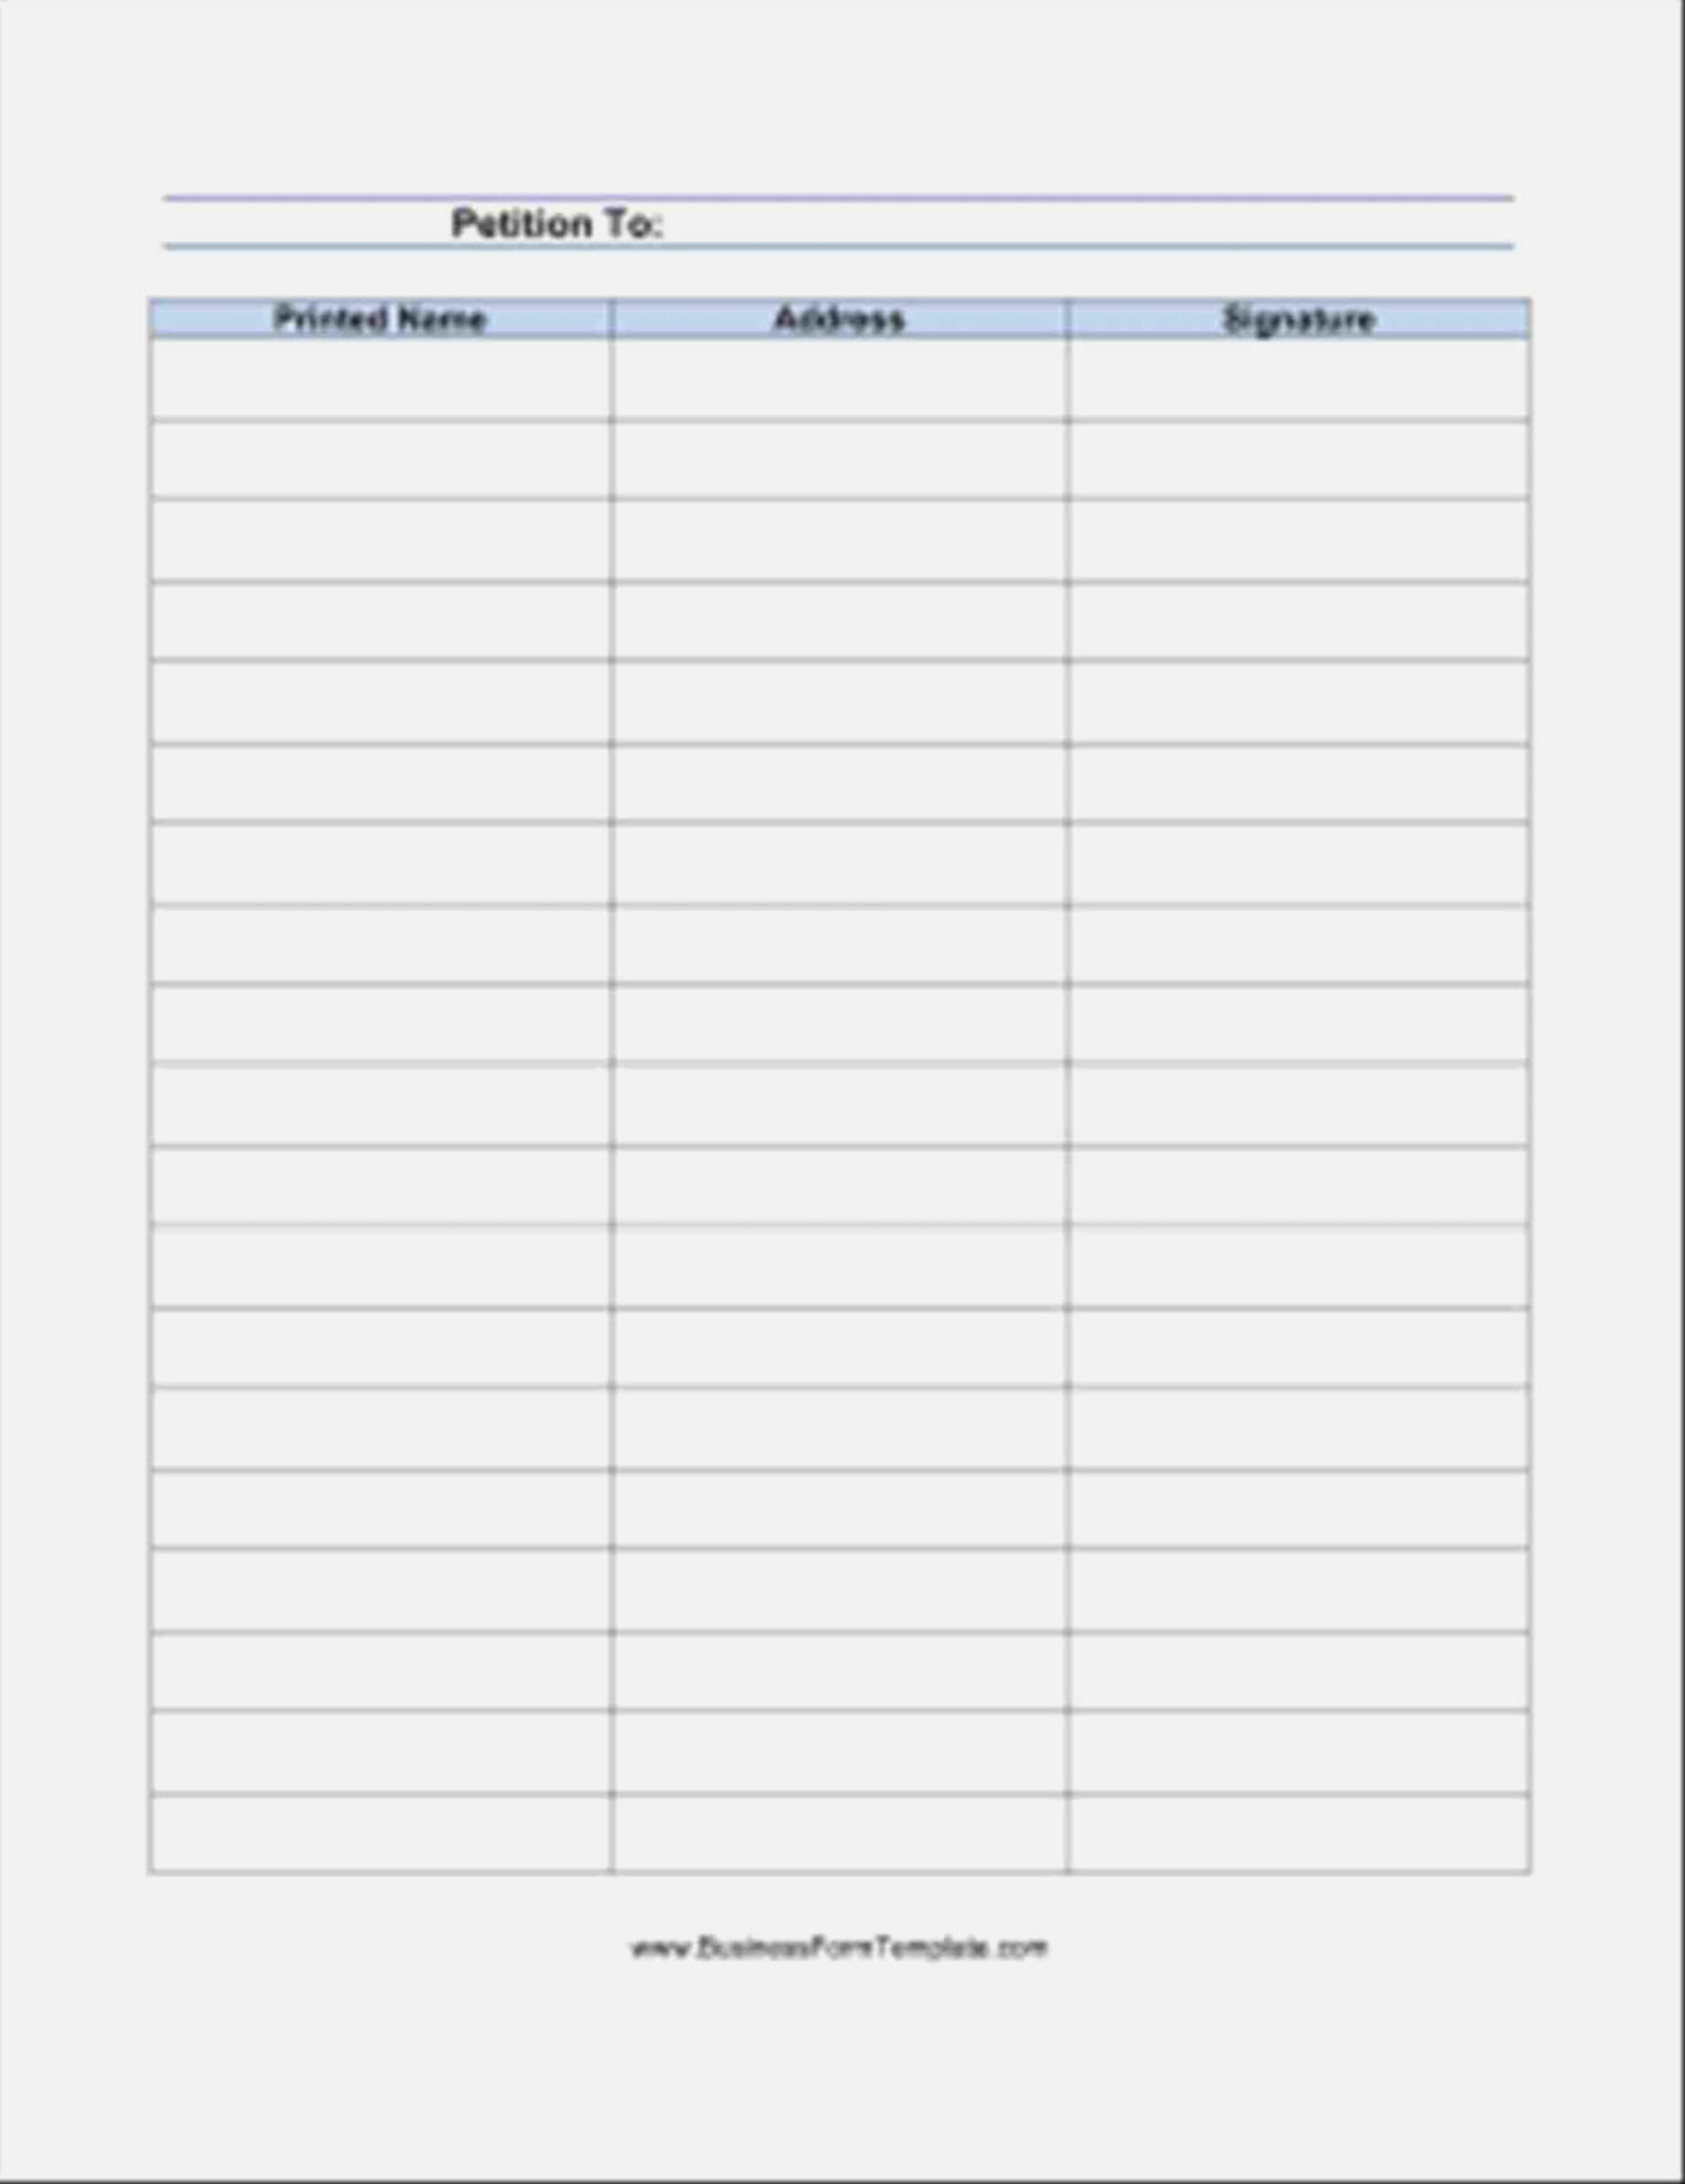 14 Petition Form Template | Realty Executives Mi : Invoice With Blank Petition Template